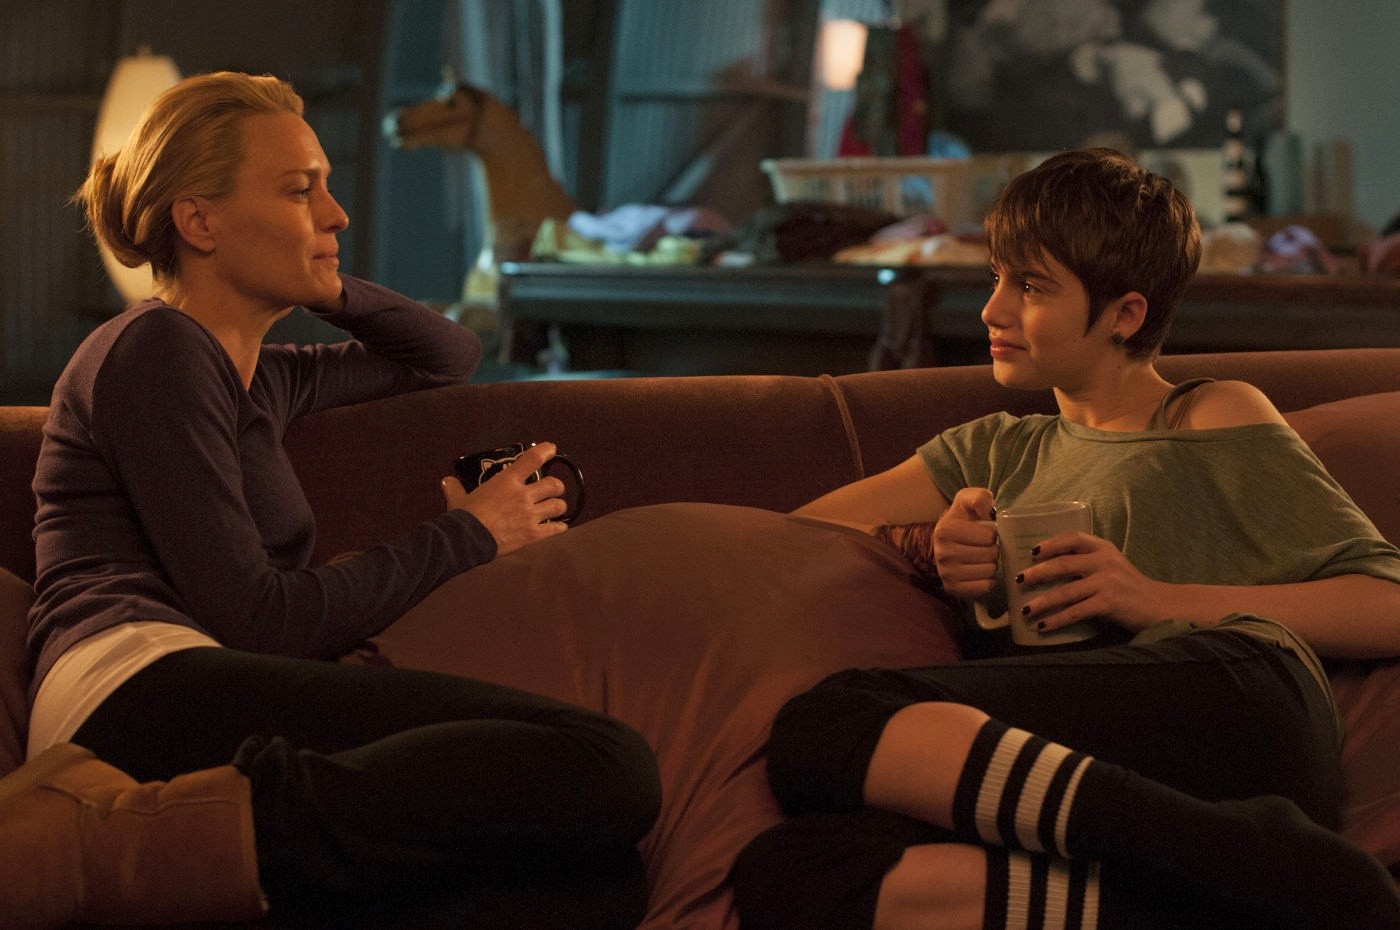 Robin Wright Penn stars as Herself and Sami Gayle stars as Sarah in Drafthouse Films' The Congress (2014)